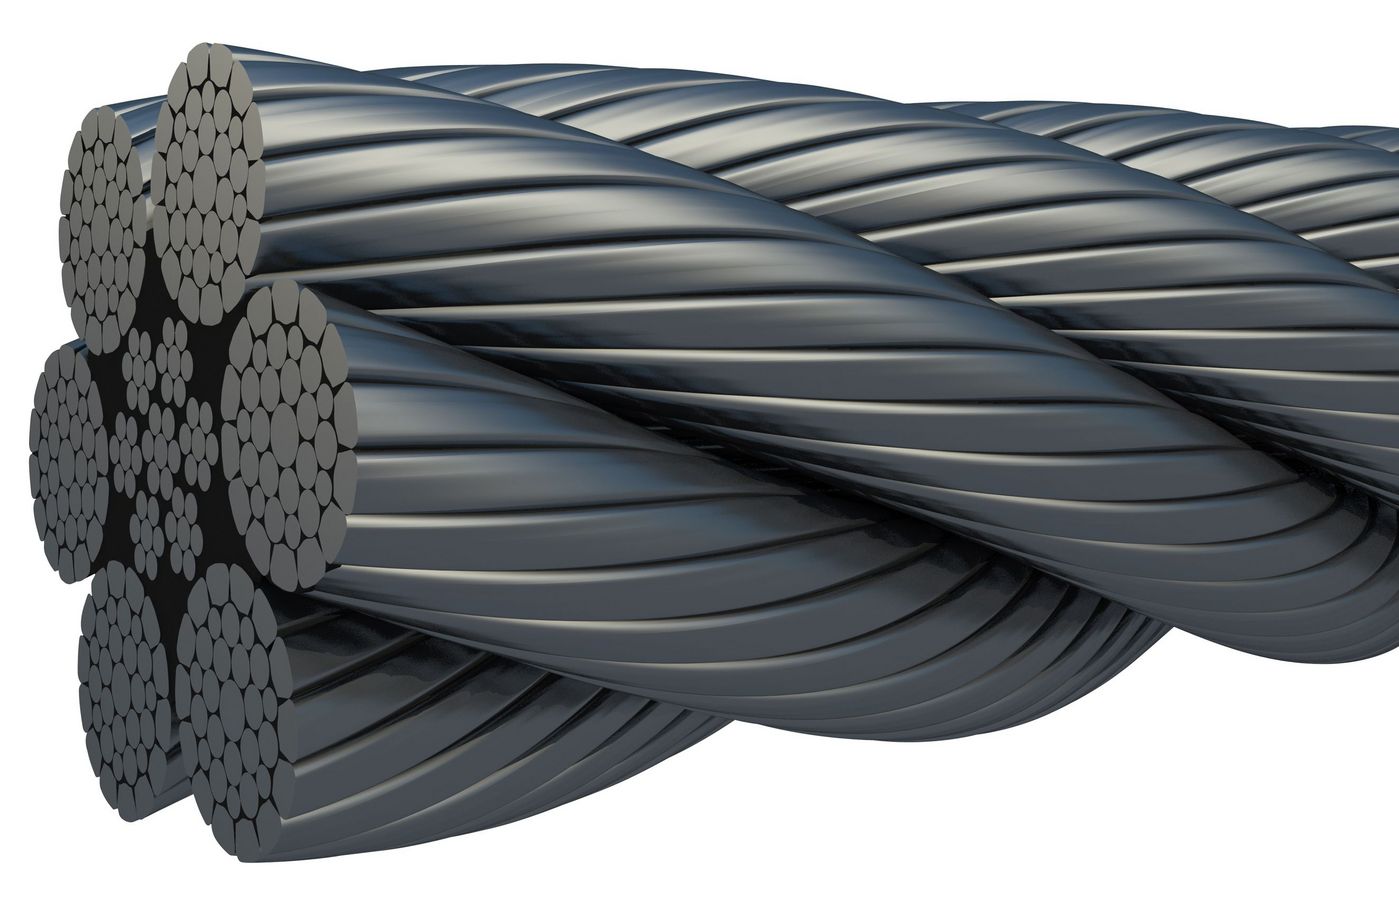 Why Use a Steel Wire Rope Over Other Materials?